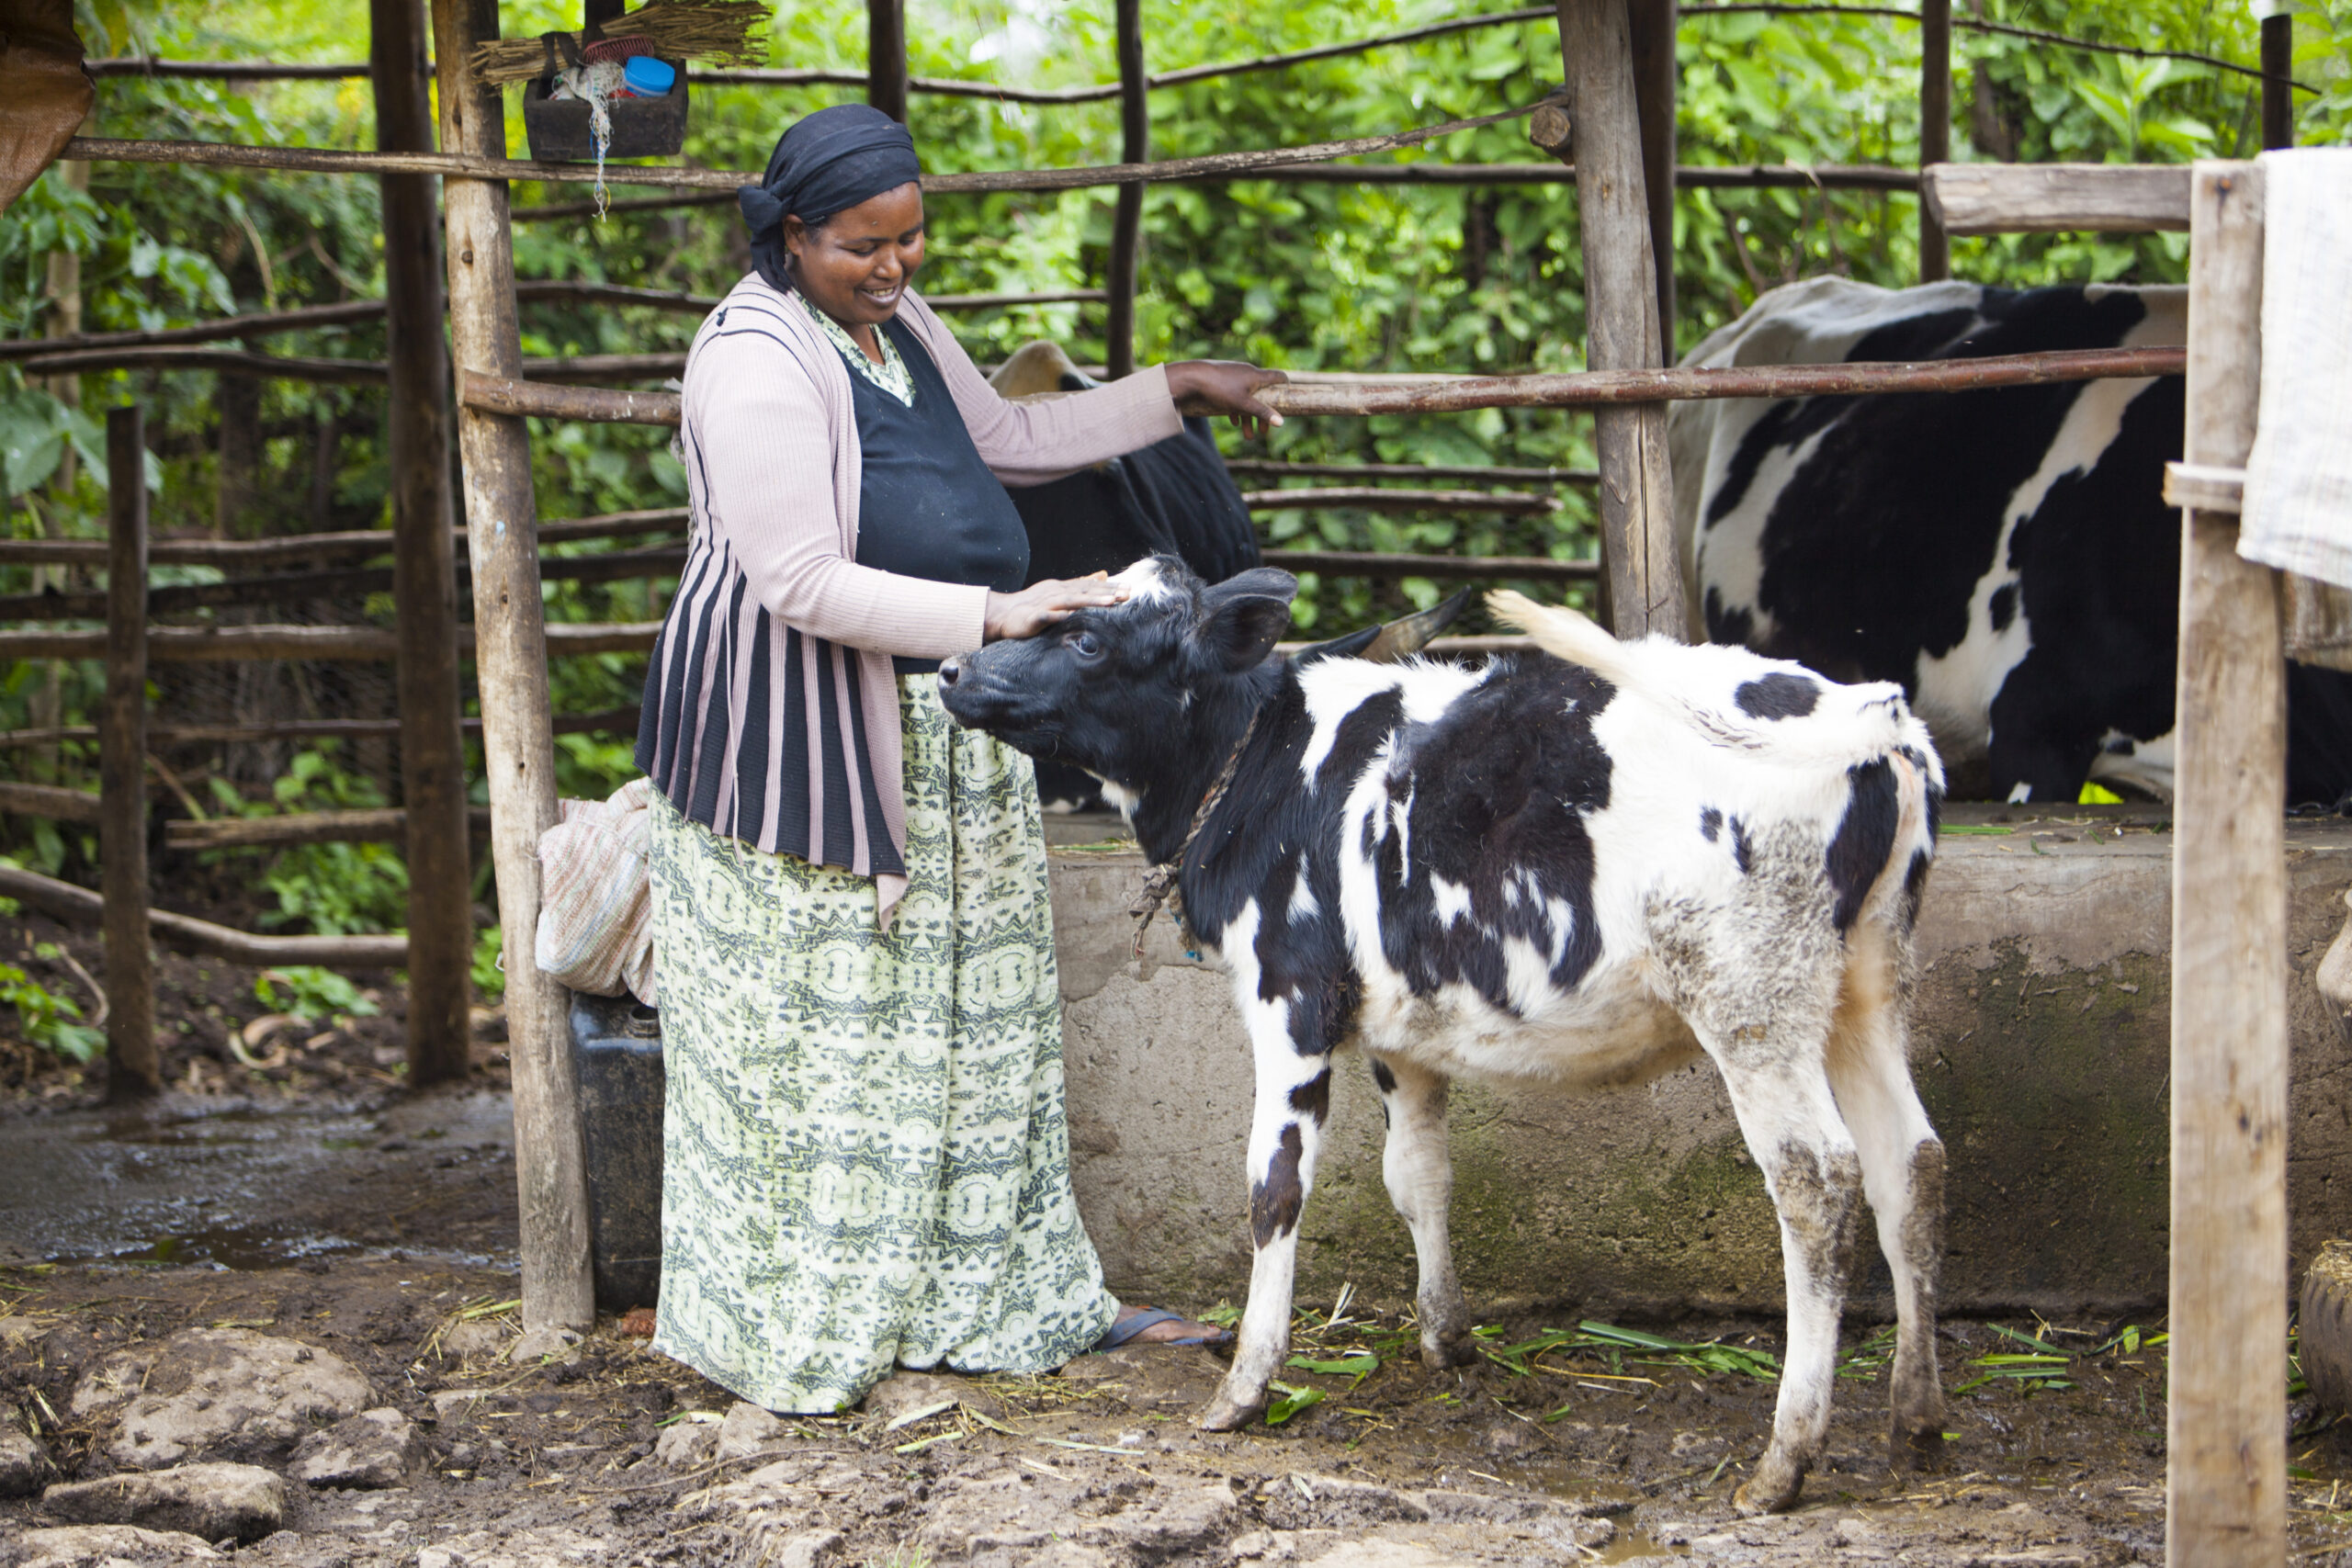 Felekech Negatu, owner of the cows who benefits from the Digital Green video training program